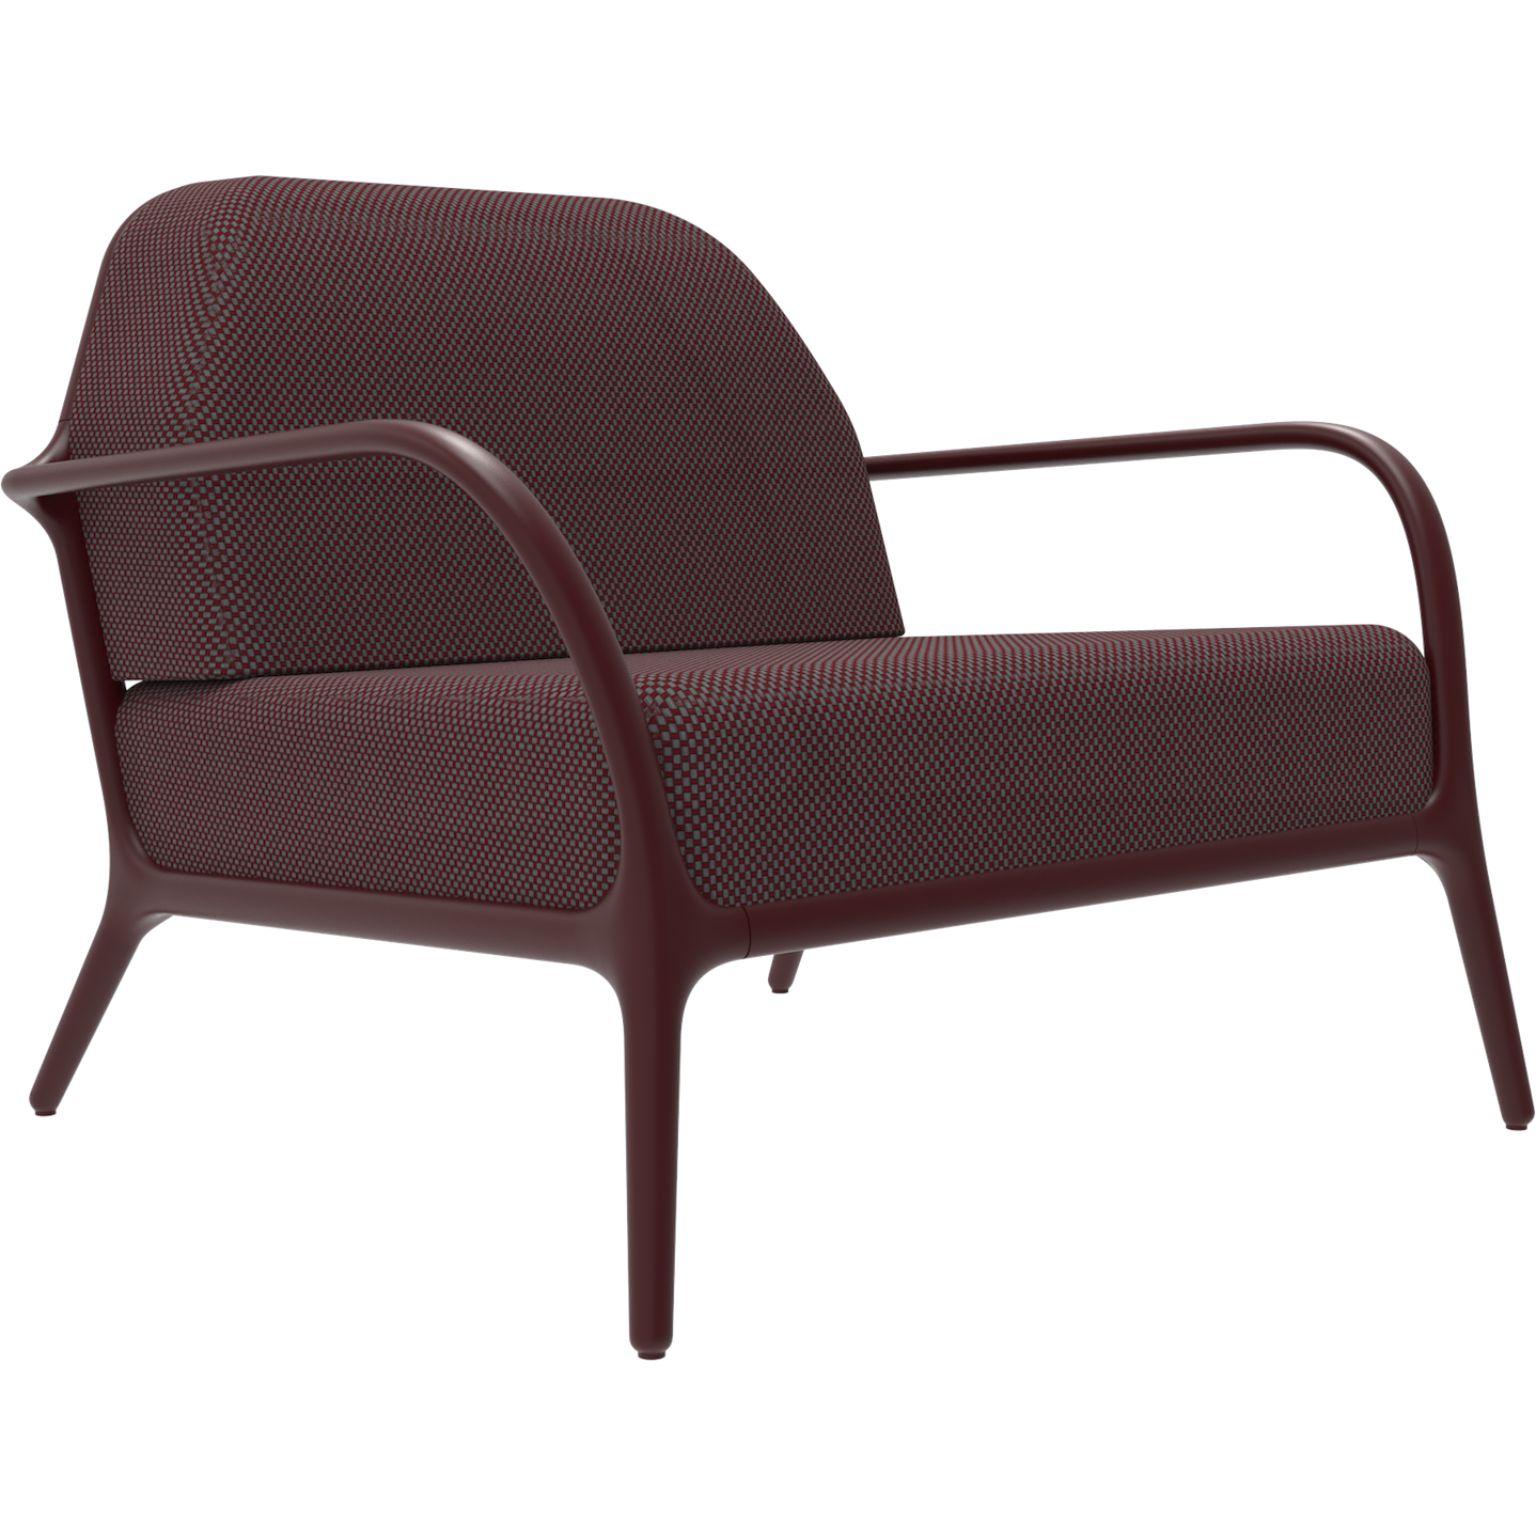 Xaloc Burgundy Amchair by MOWEE
Dimensions: D 100 x W 102 x H 81 cm (Seat Height 42 cm)
Material: Aluminum, Upholstery
Weight: 29 kg
Also available in different colours and finishes. Please contact us.

 Xaloc synthesizes the lines of interior